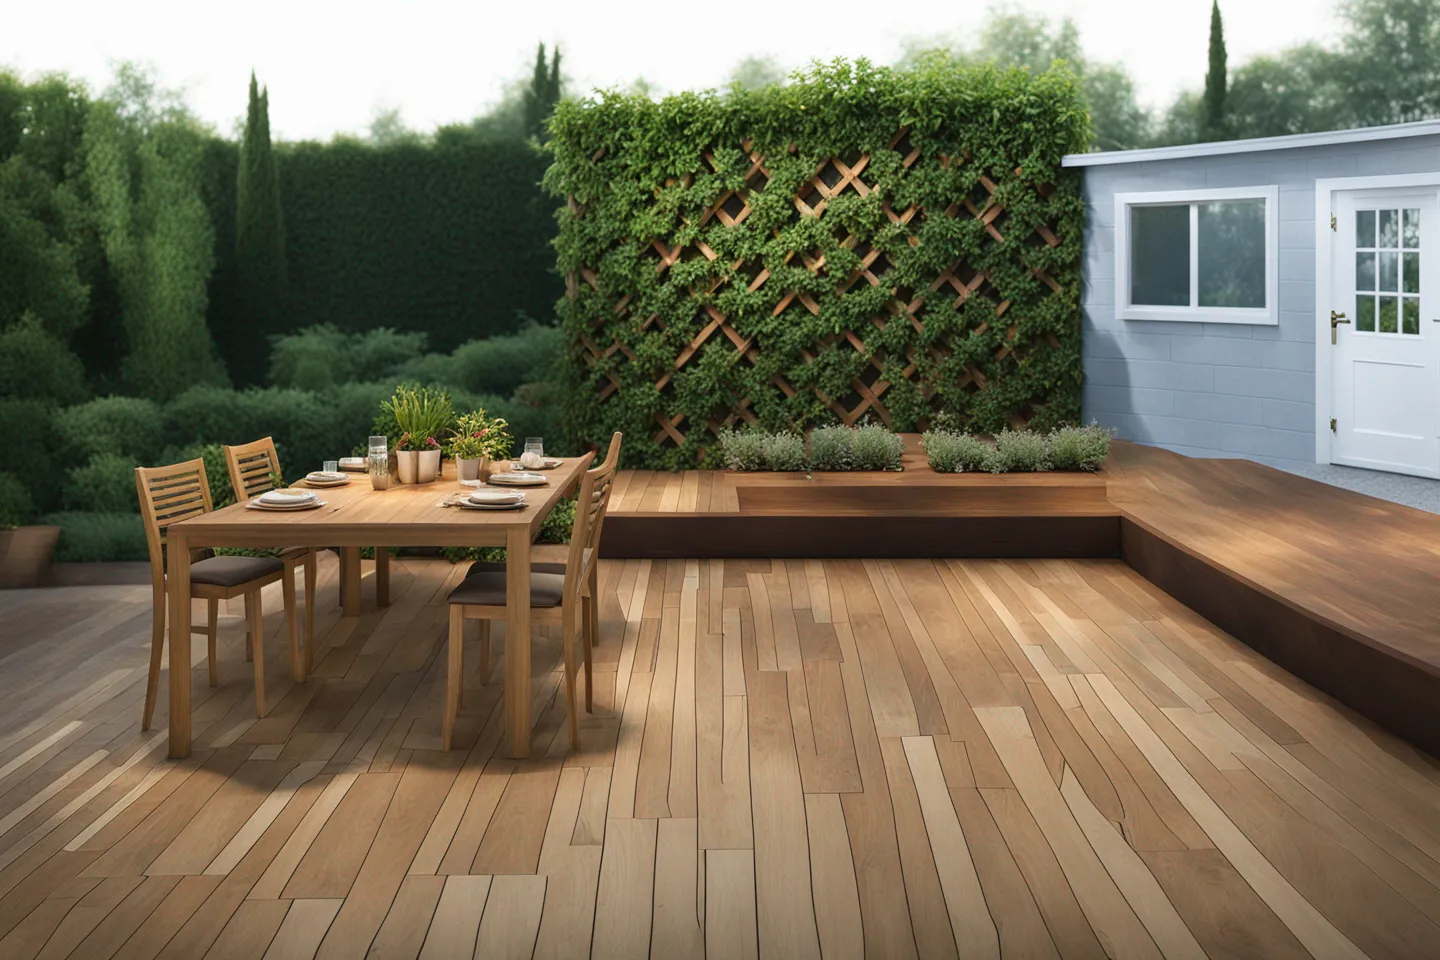 Contemporary garden design generated by AI.